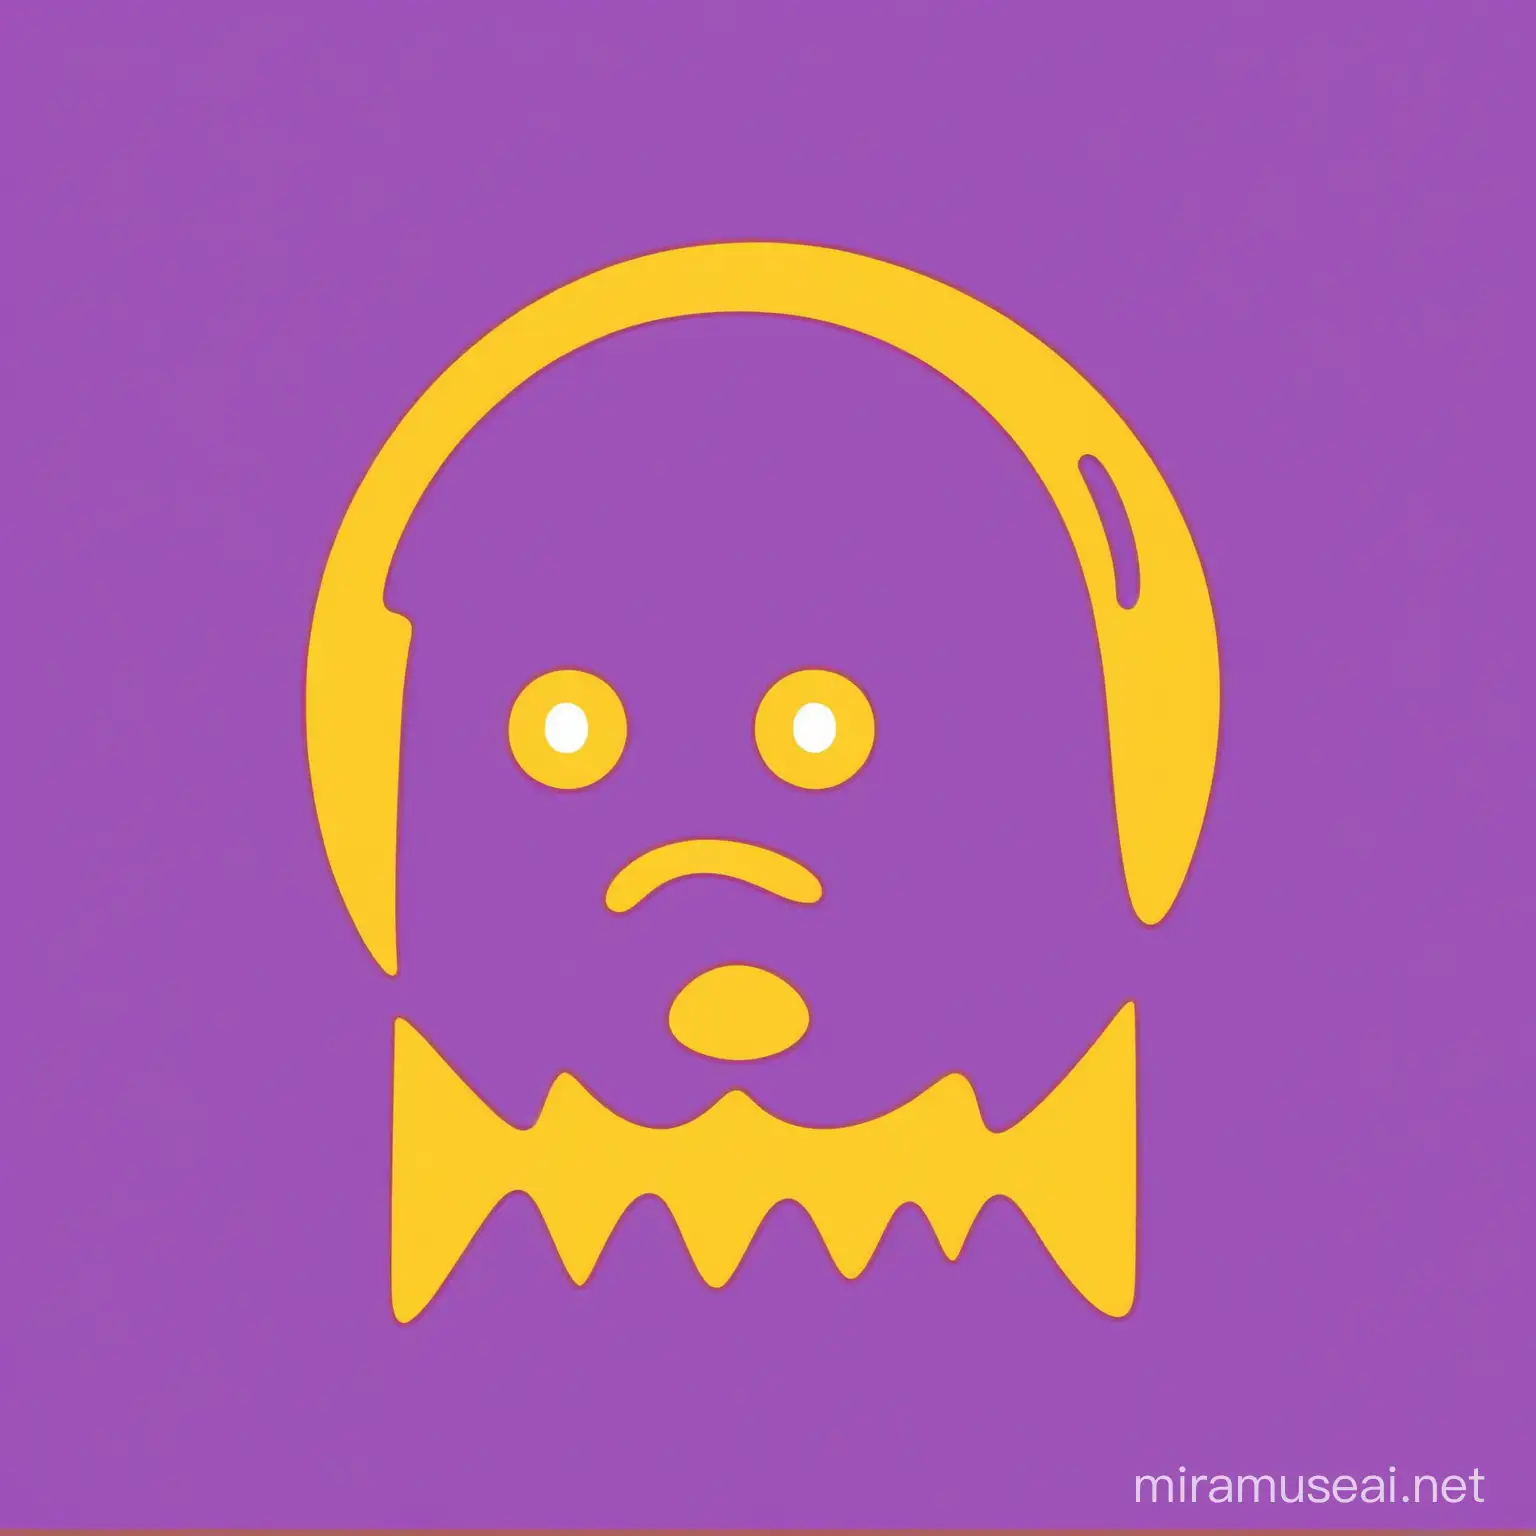 Minimalist and Ironic Logo Design with Memes and Humor in Purple and Yellow Tones